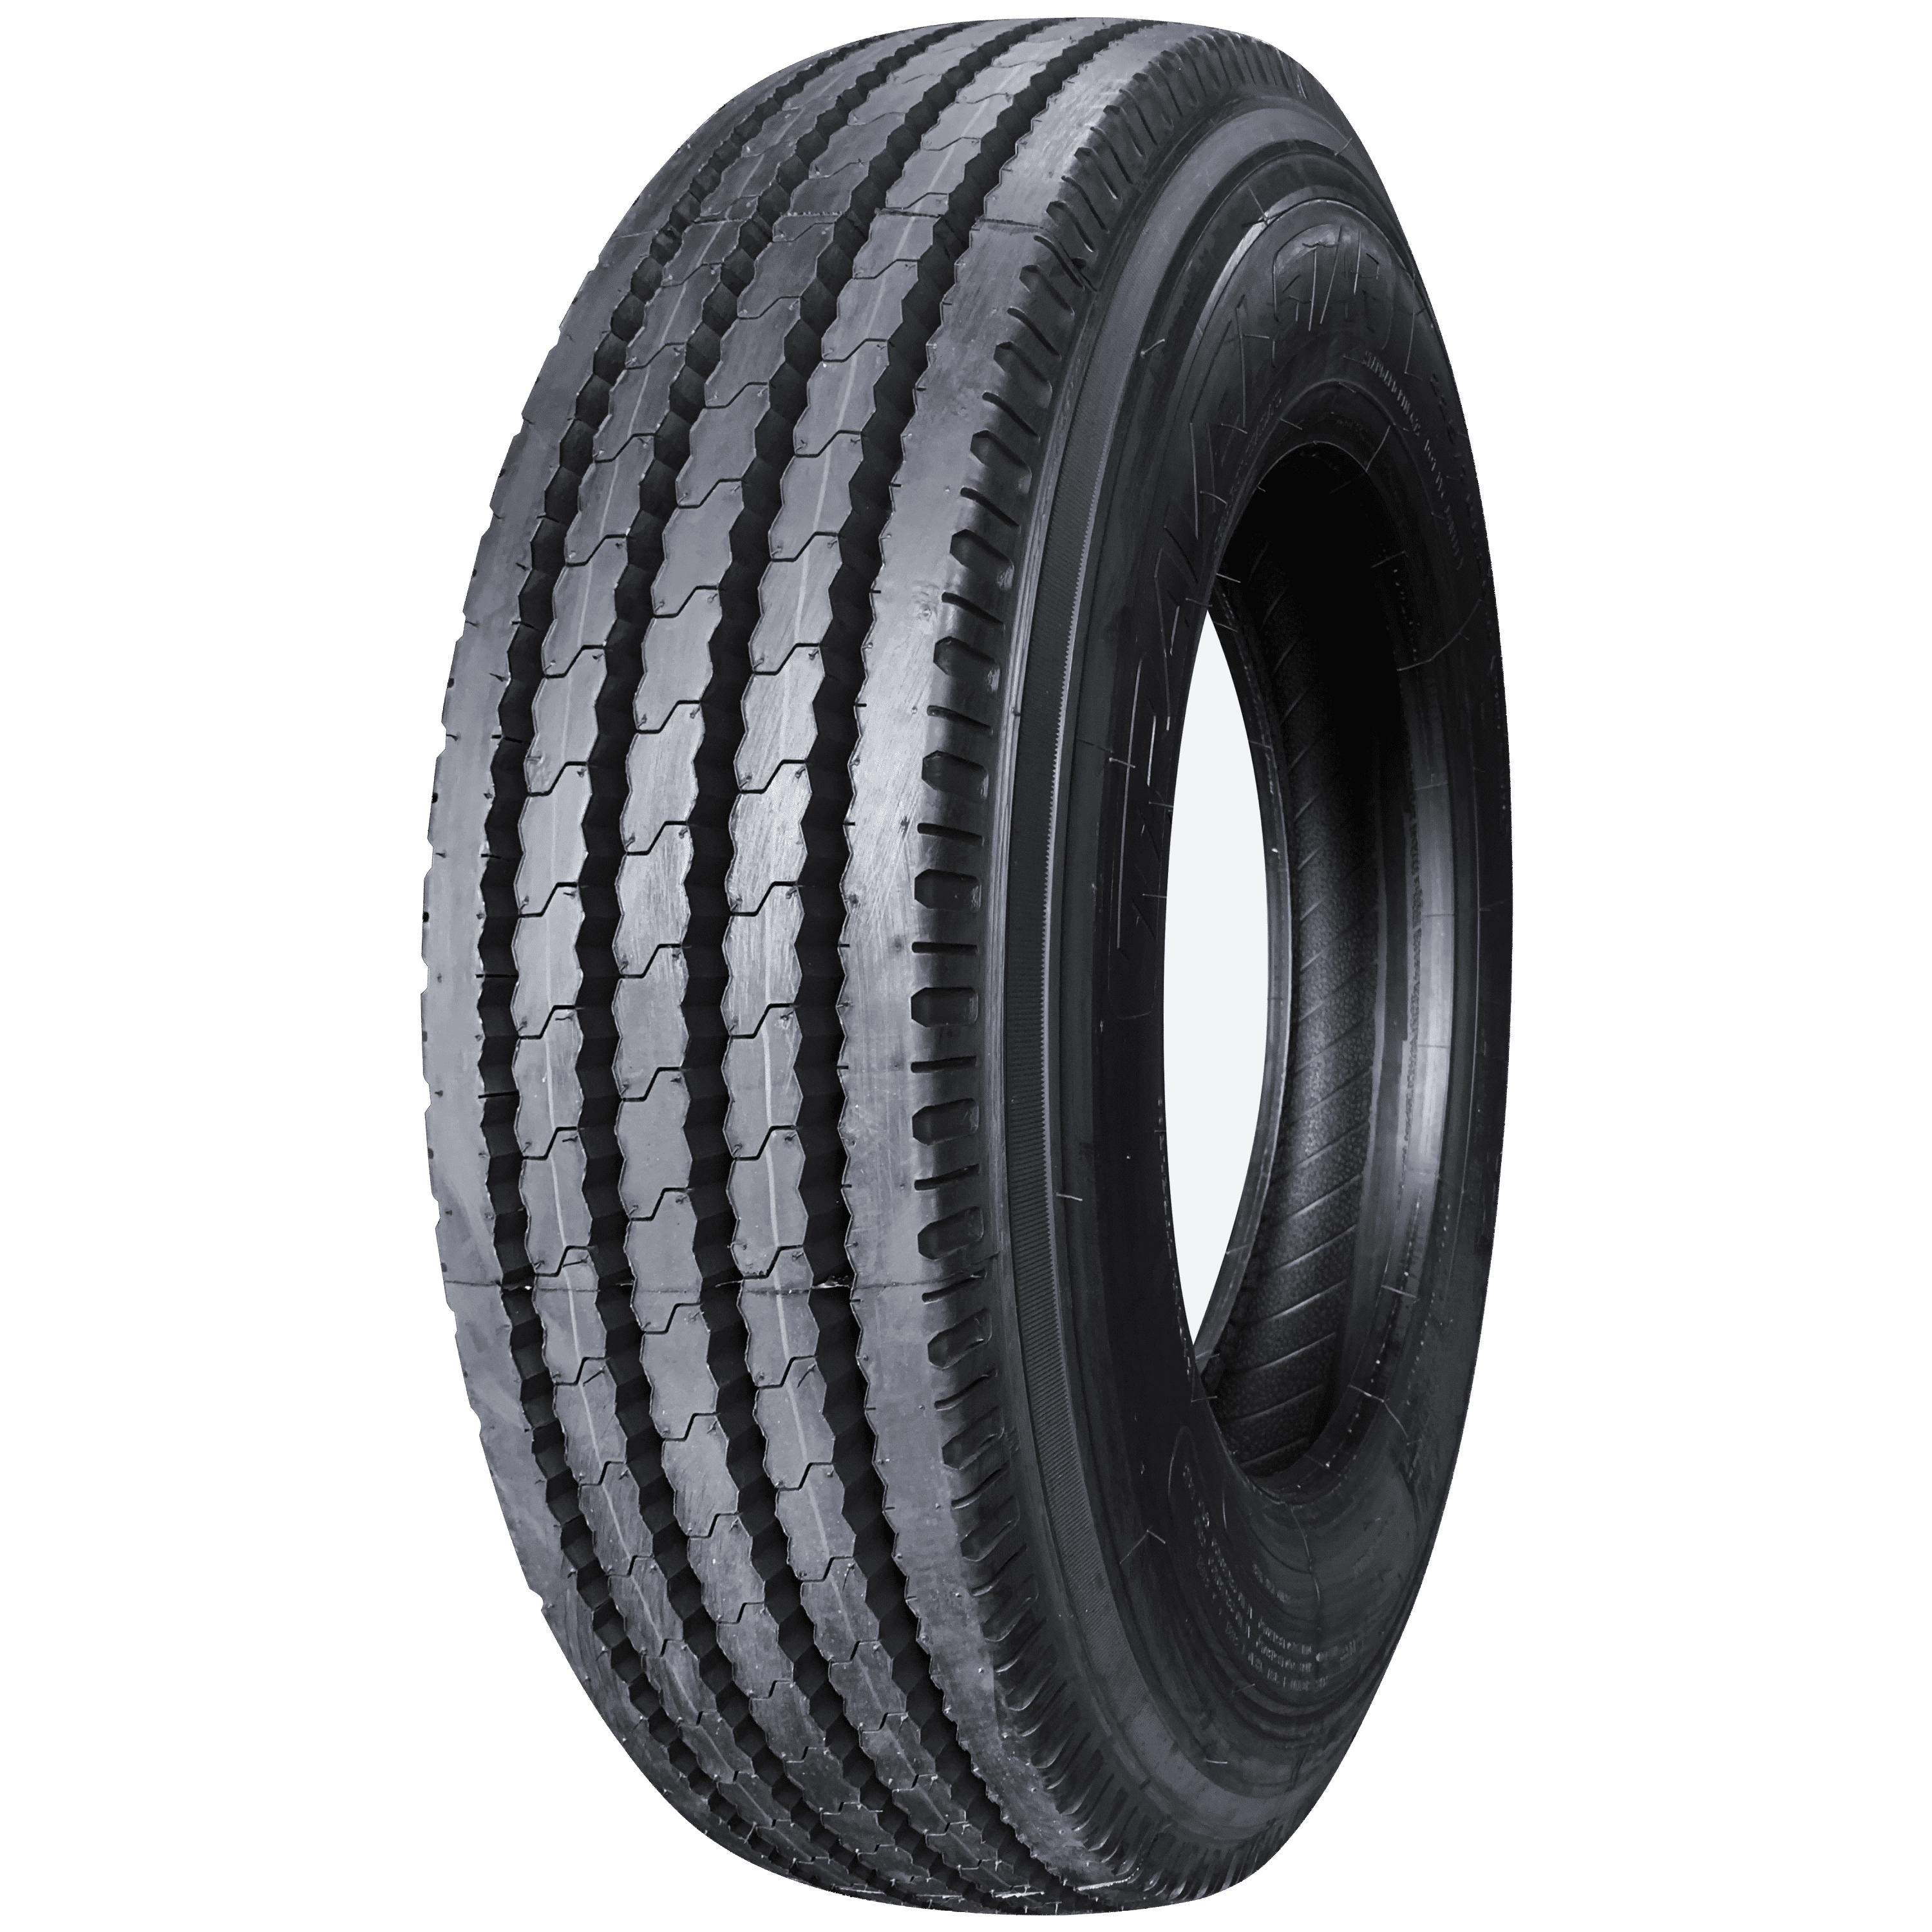 Travelstar TA901 All Position Multi-Use Radial Truck 255/70R22.5 16 Ply  140/137 M Commercial Tires